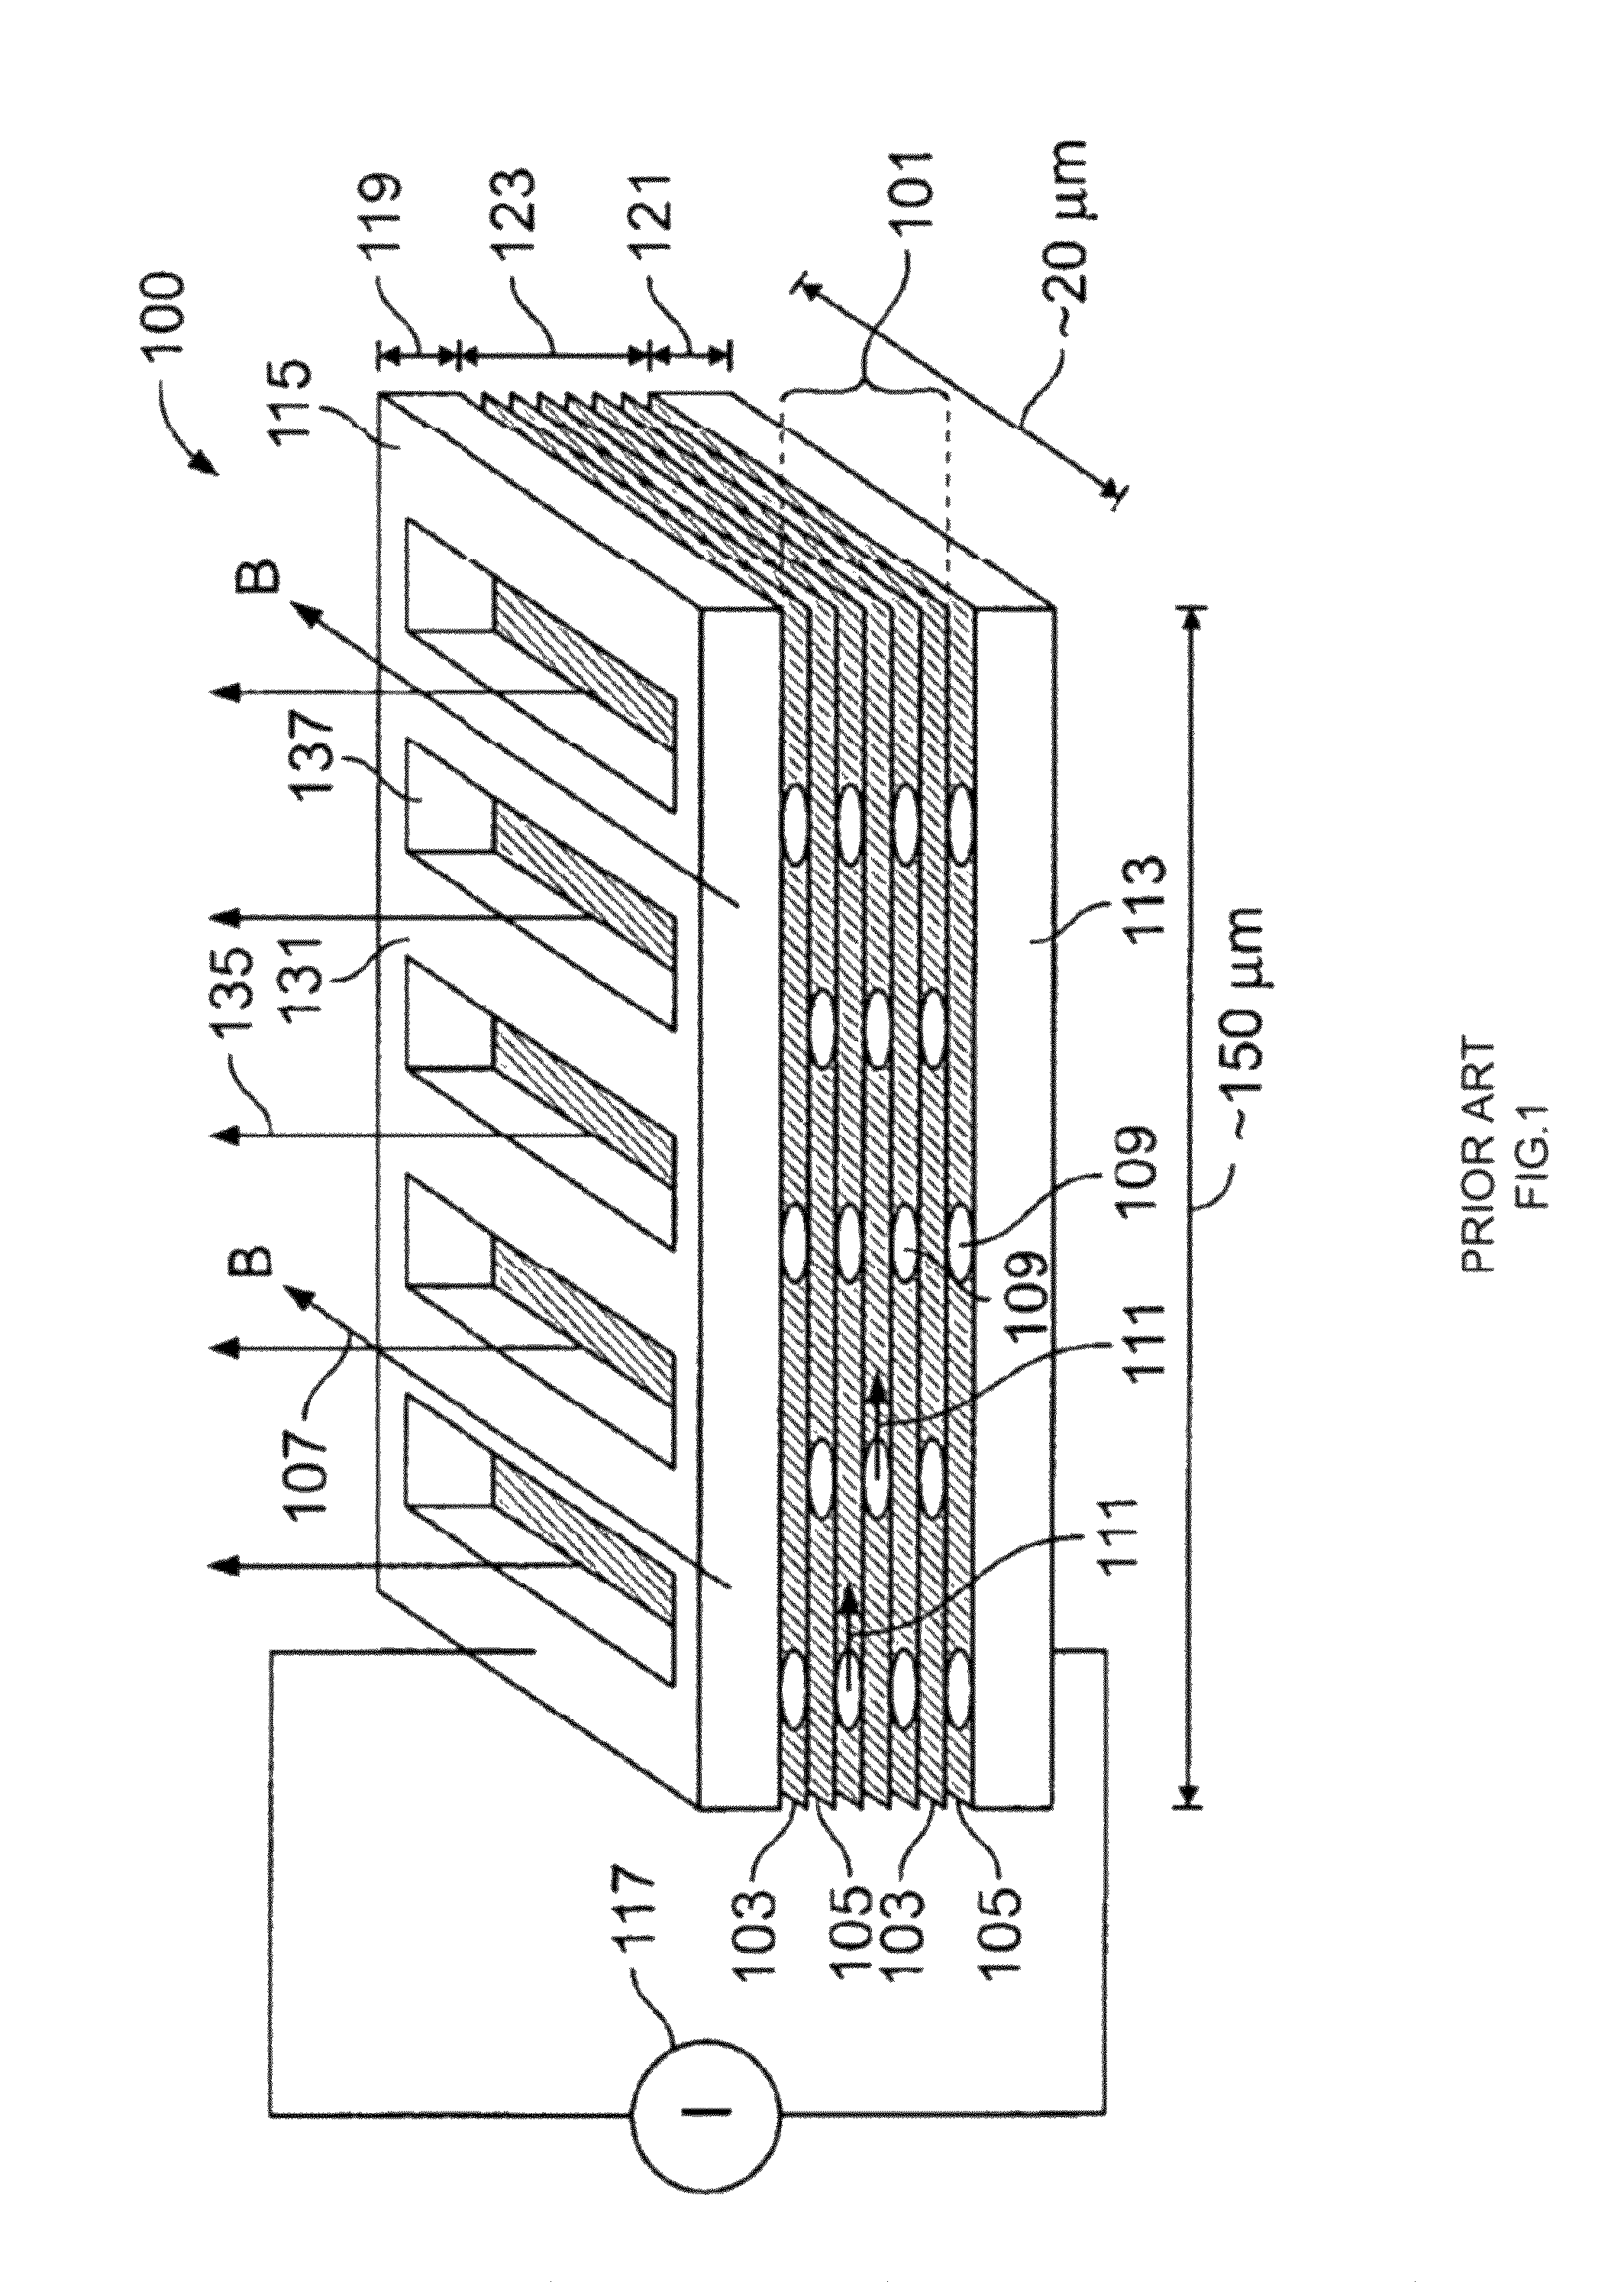 Method and apparatus for detecting explosives using differential inverse hilbert spectroscopy facilitated by a high temperature superconducting quantum system